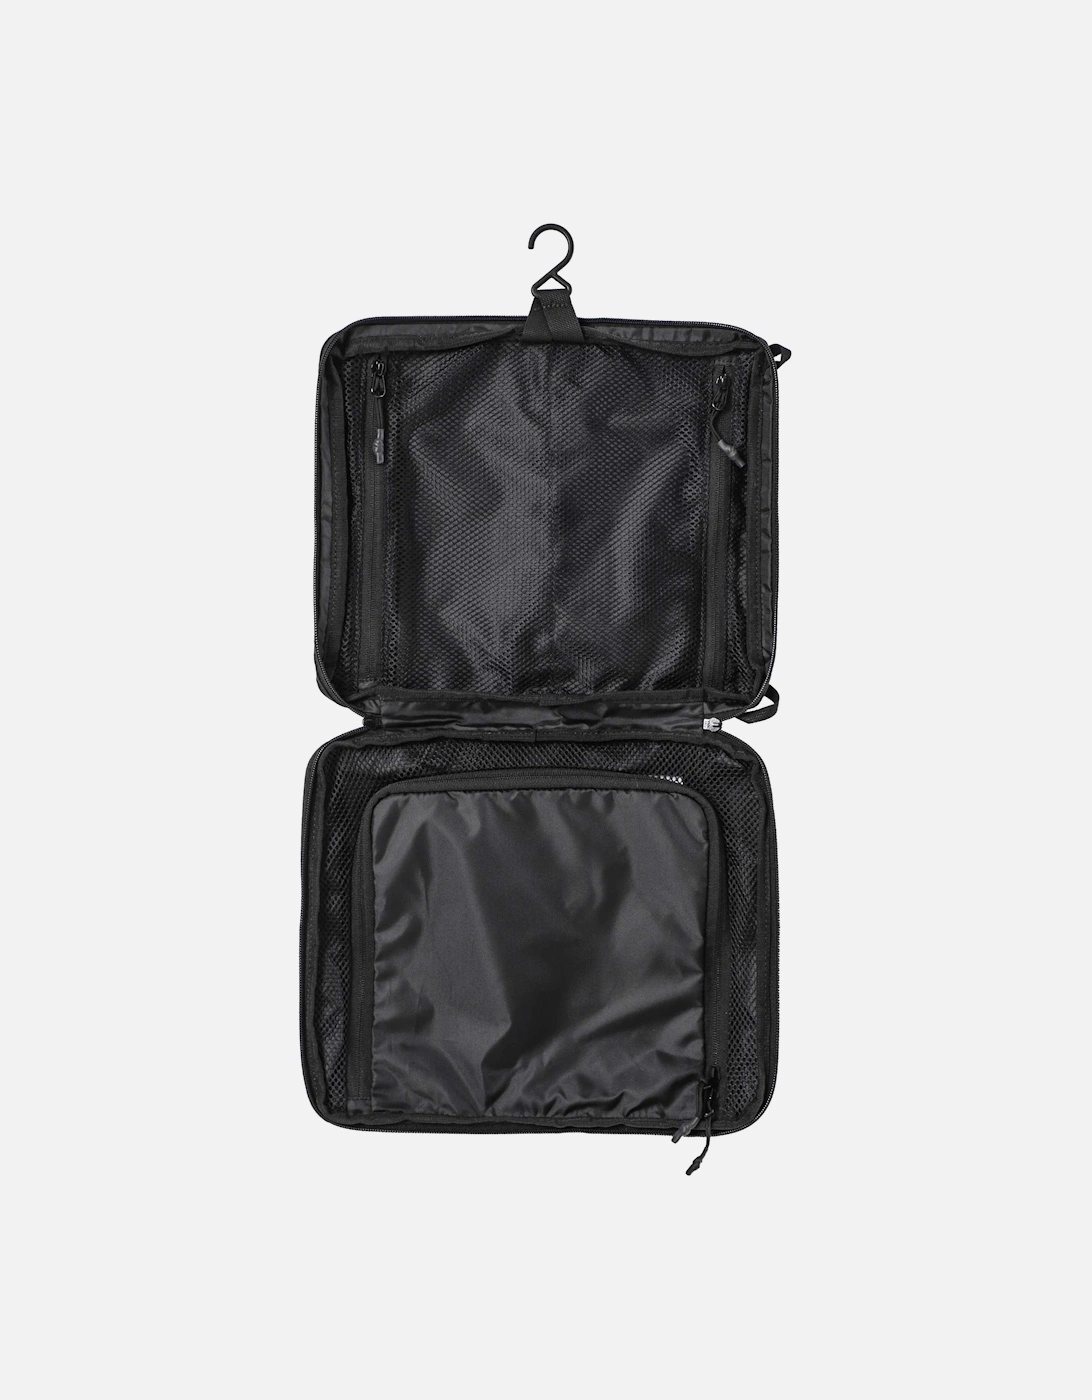 Smart Packing Cube